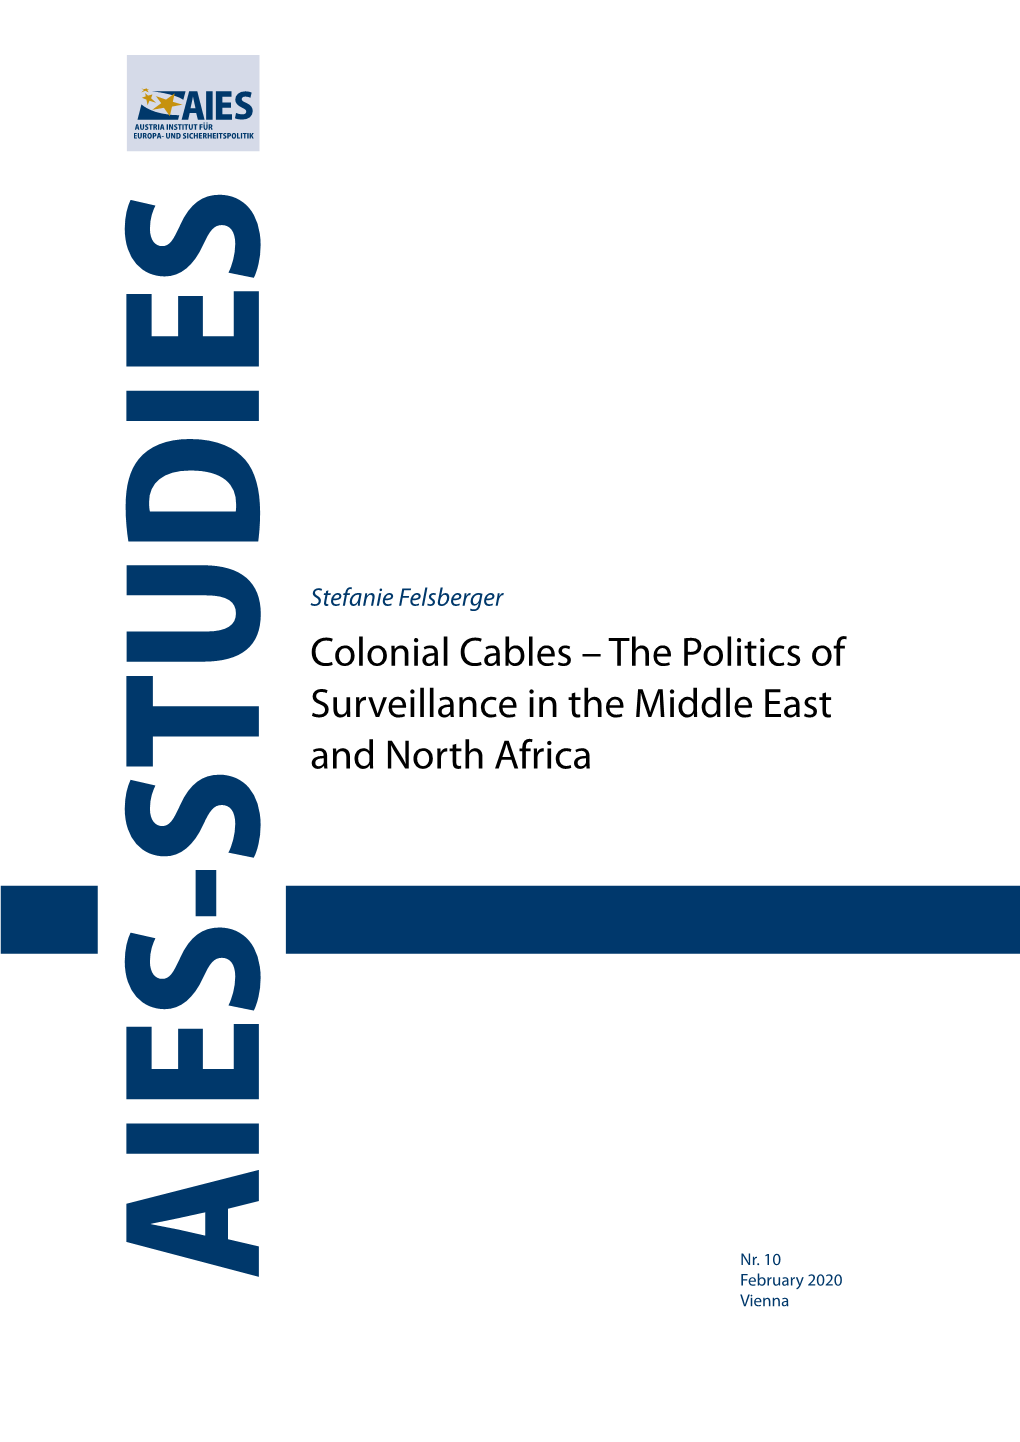 Colonial Cables – the Politics of Surveillance in the Middle East and North Africa